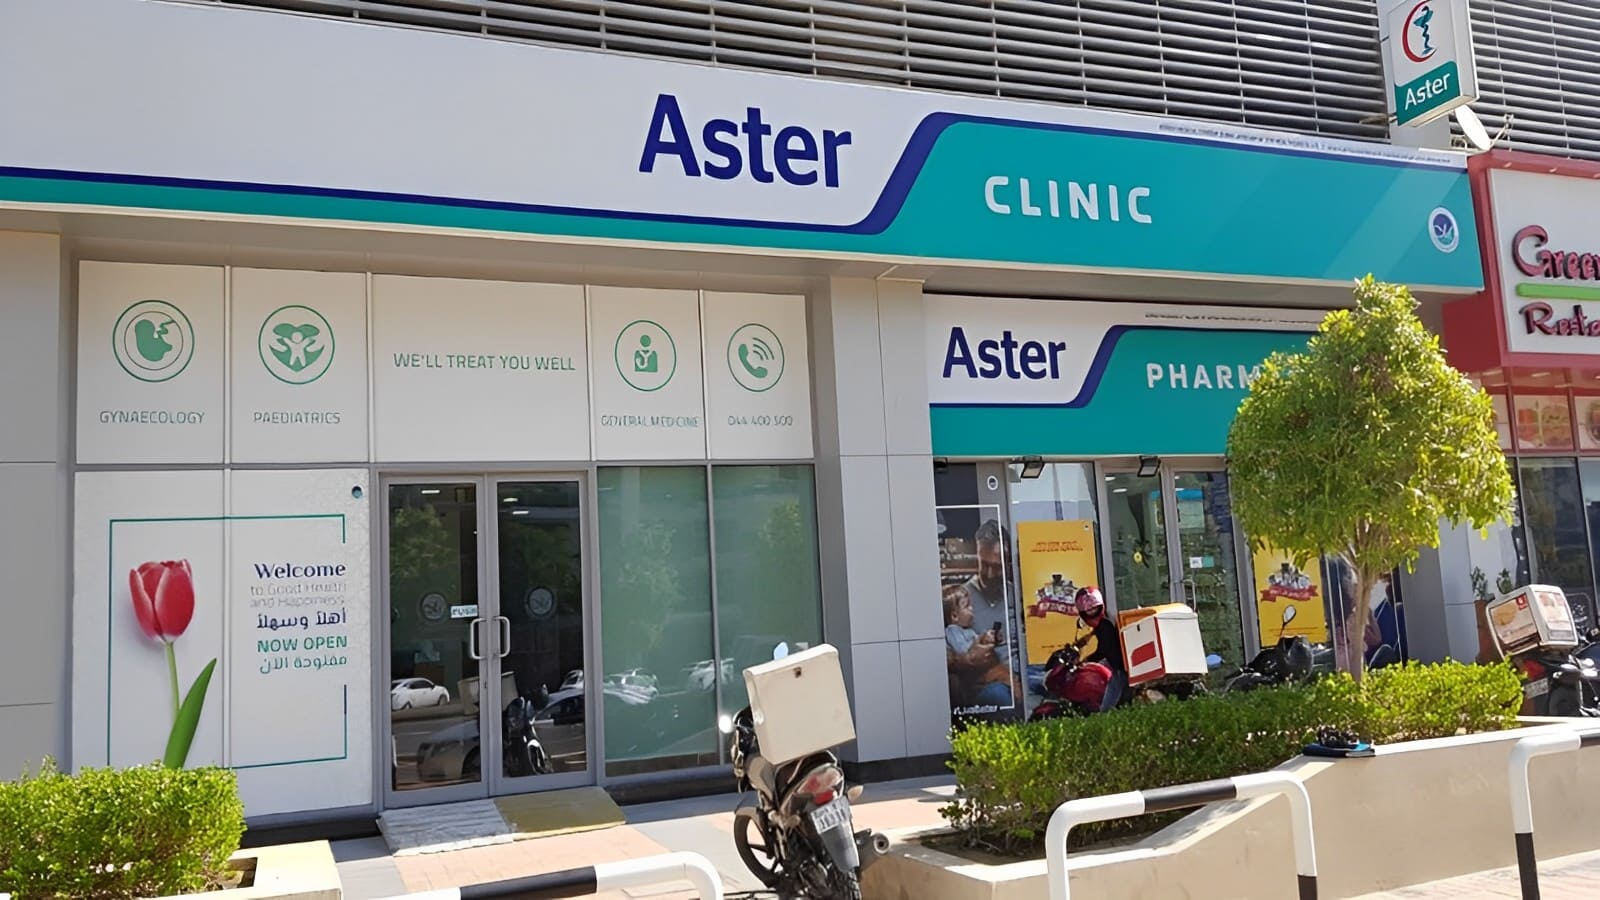 Dr. Moopen's Family Invests Rs 460 Cr, Raises Stake in Aster DM Healthcare by 4%